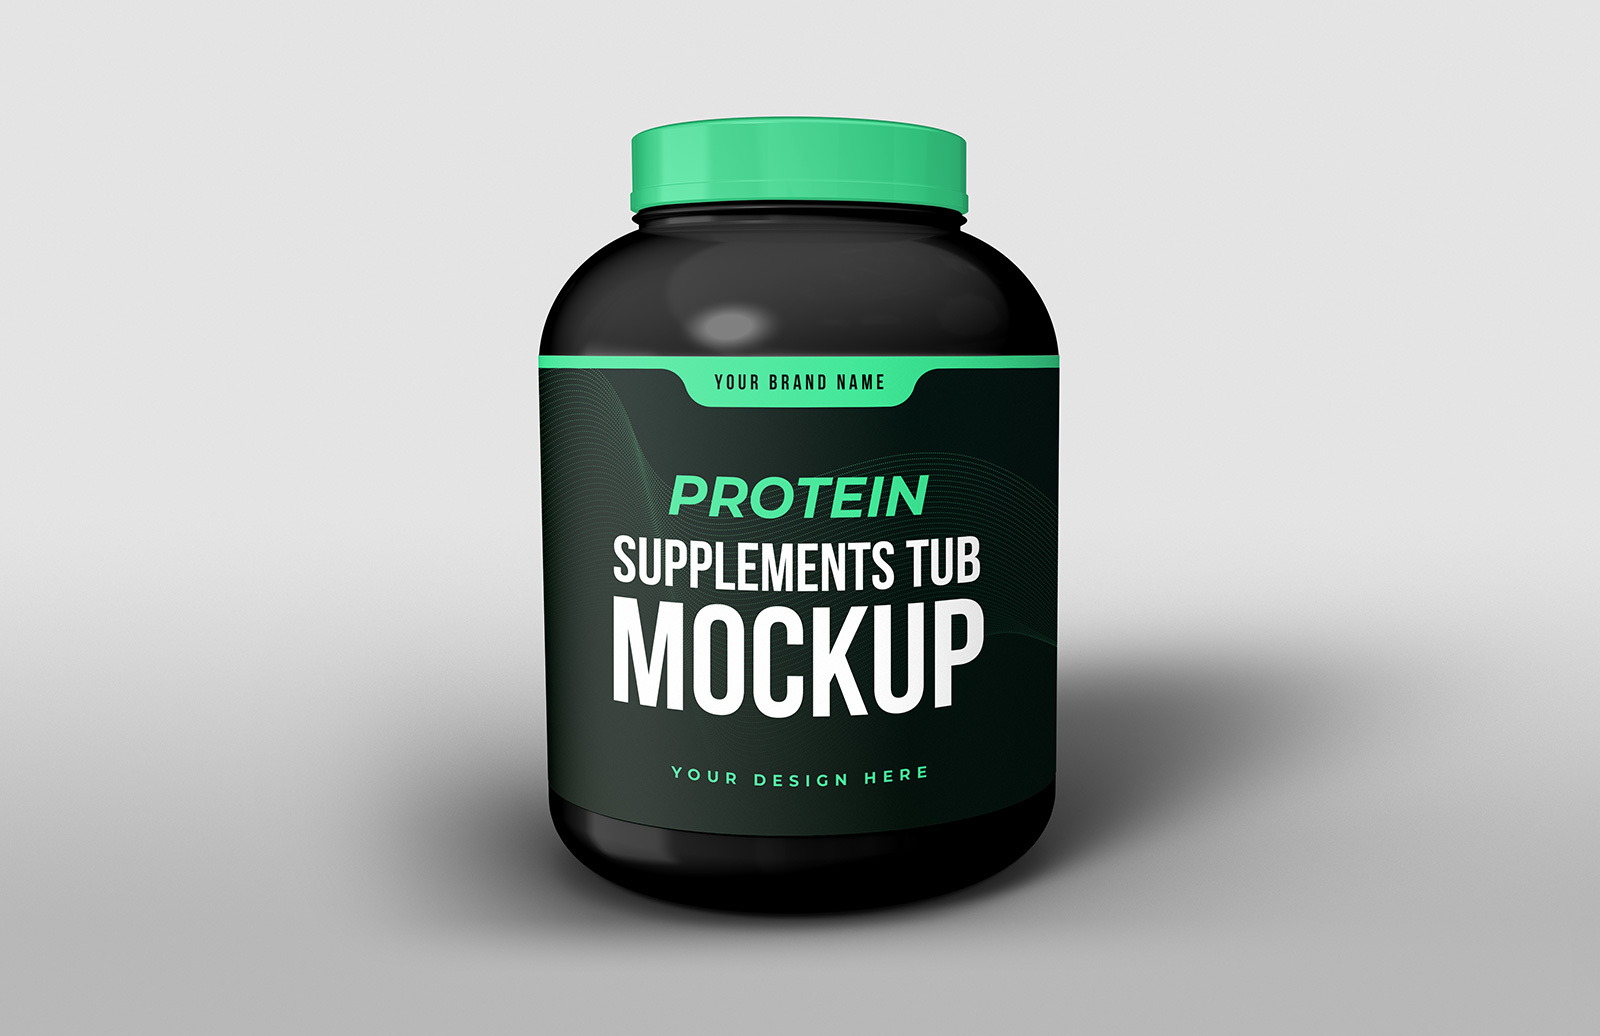 Download Free Protein Supplements Tub Mockup Medialoot